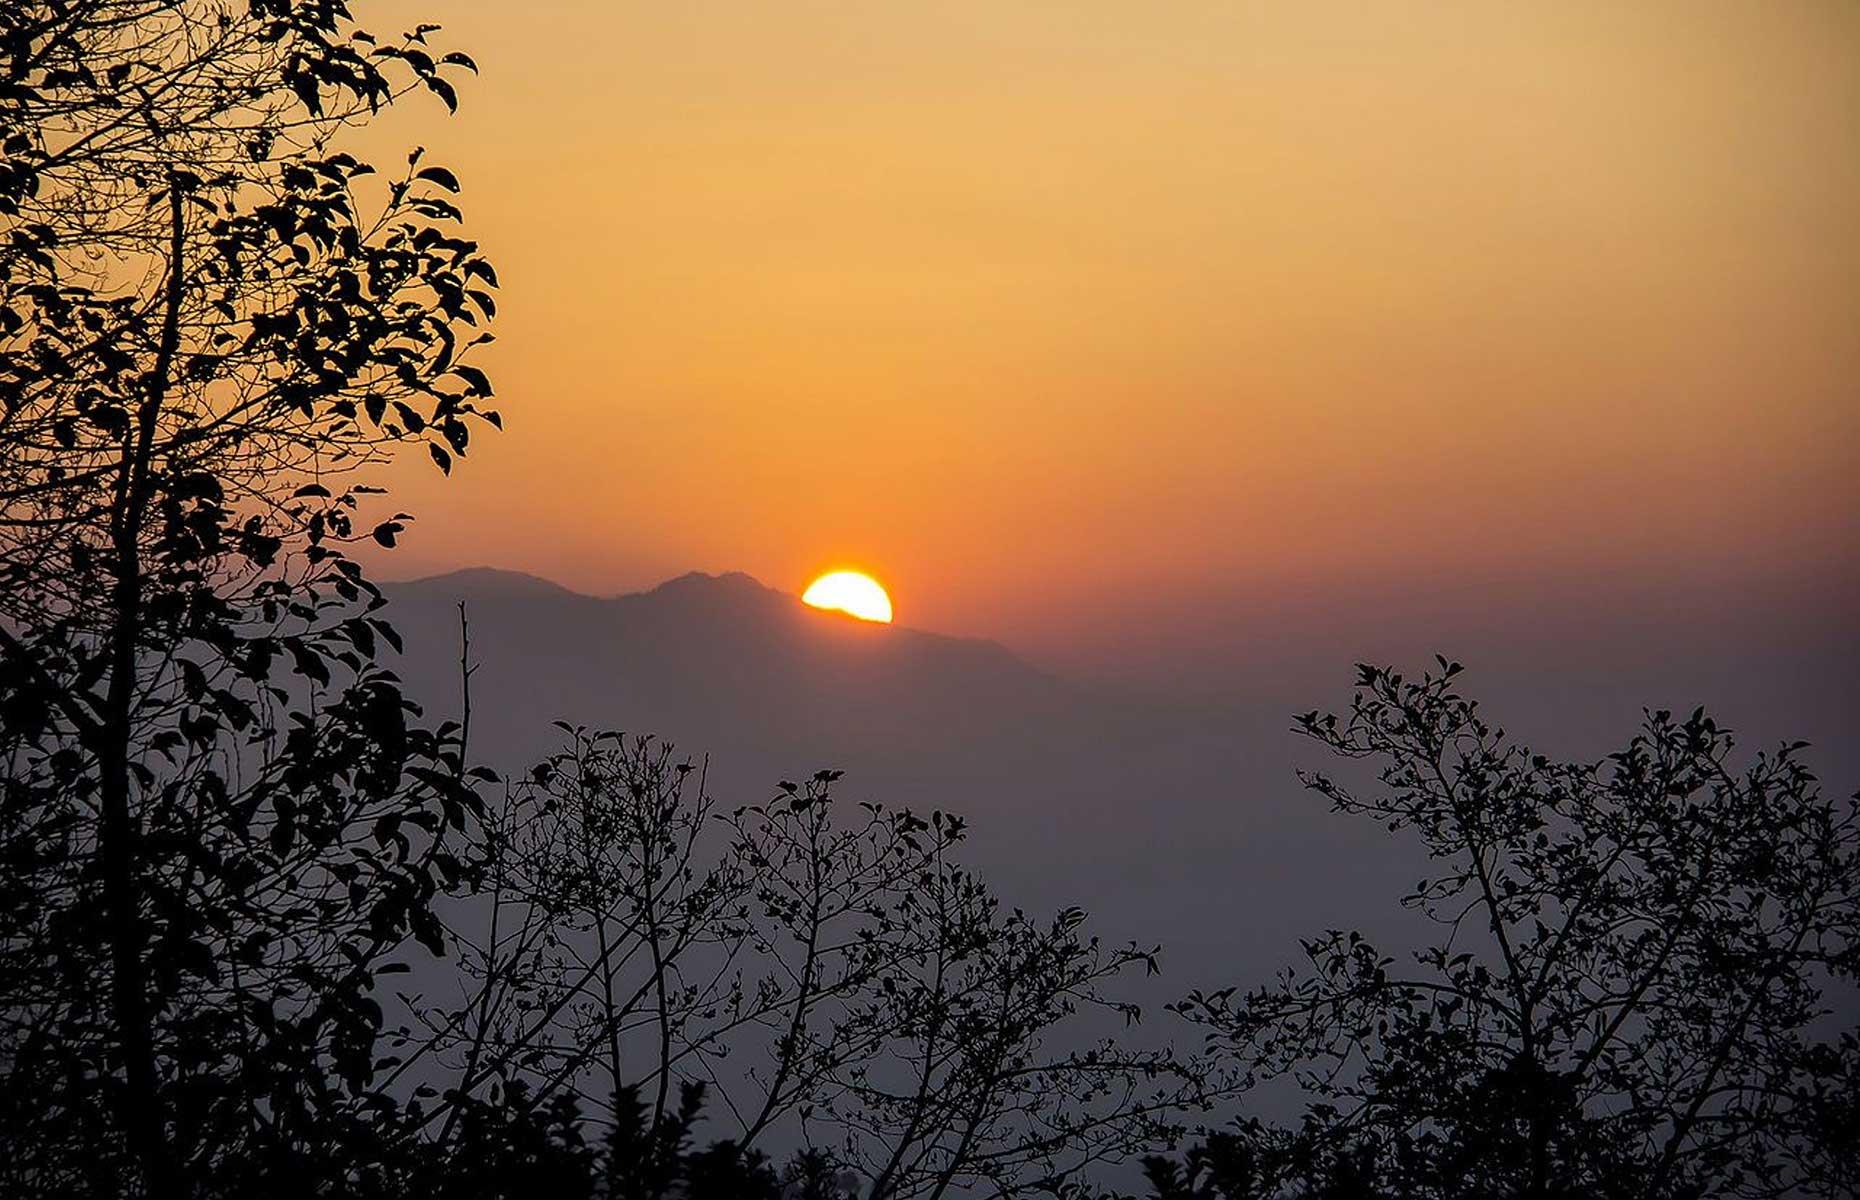 While sunrises against mountain ranges are always something special, imagine watching the dawn over one of the most impressive in the world. Nagarkot in Nepal offers some of the best possible views of the Himalayas and is well-known for how striking the snow-capped peaks look at 5am when the sun begins emerging. The hill station showcases vistas that stretch all the way to Mount Everest.